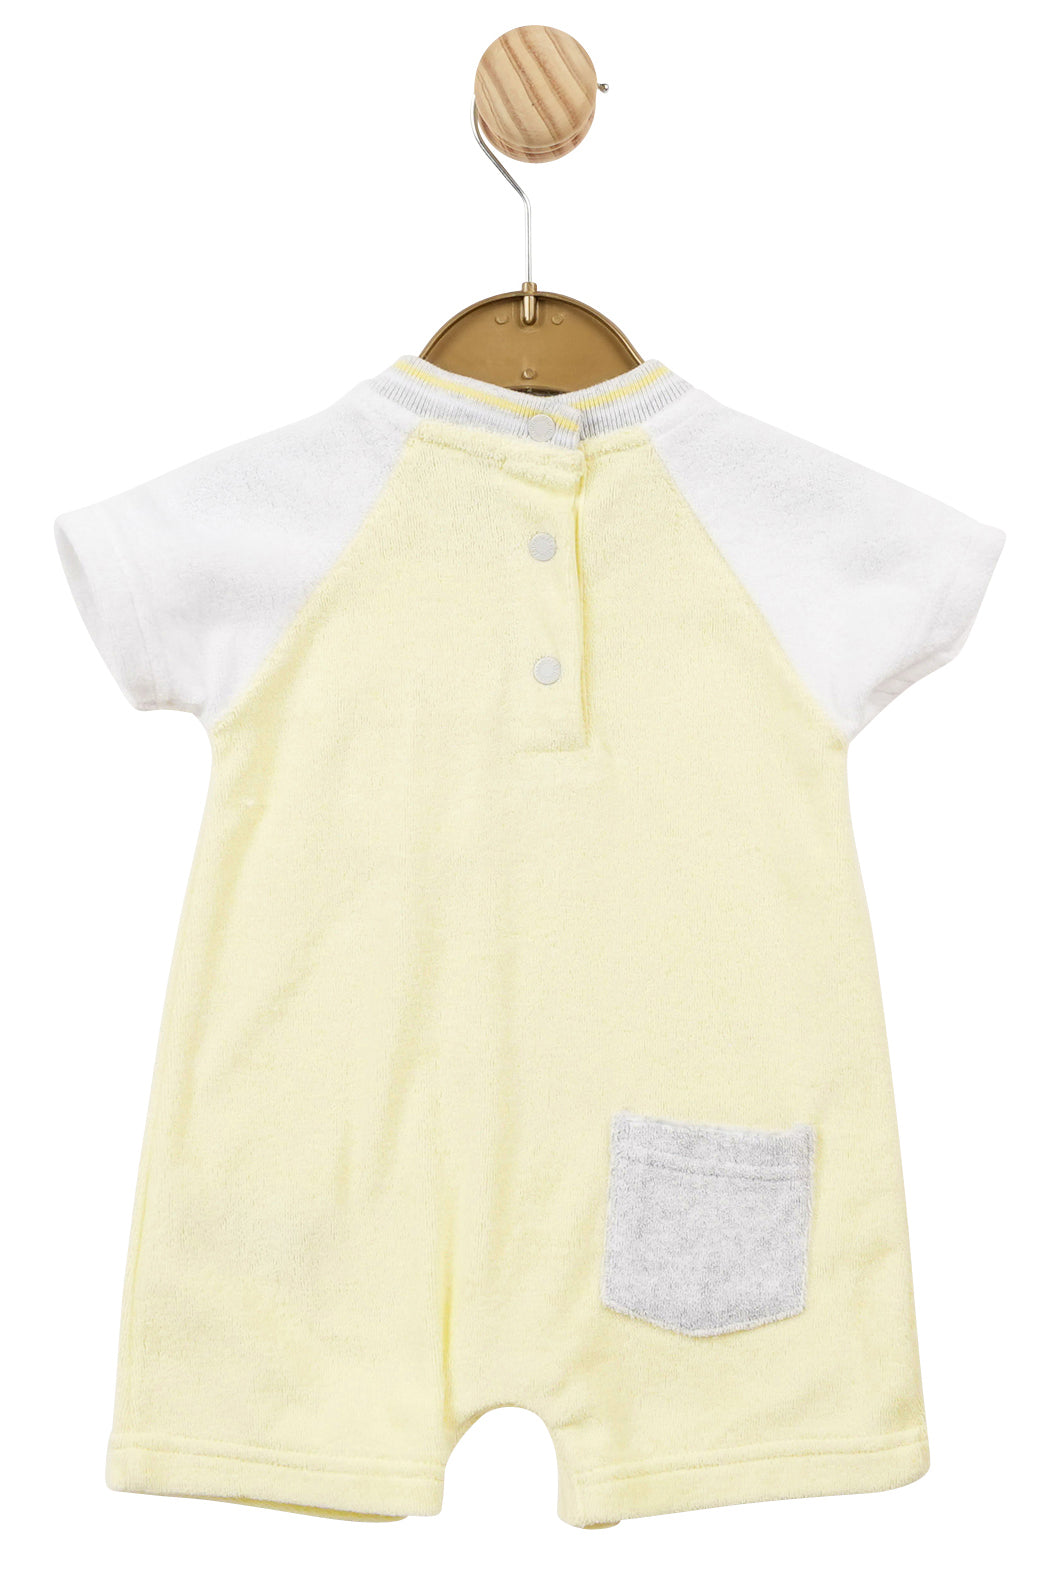 Mintini Baby "August" Lemon Terry Towelling Romper | Millie and John